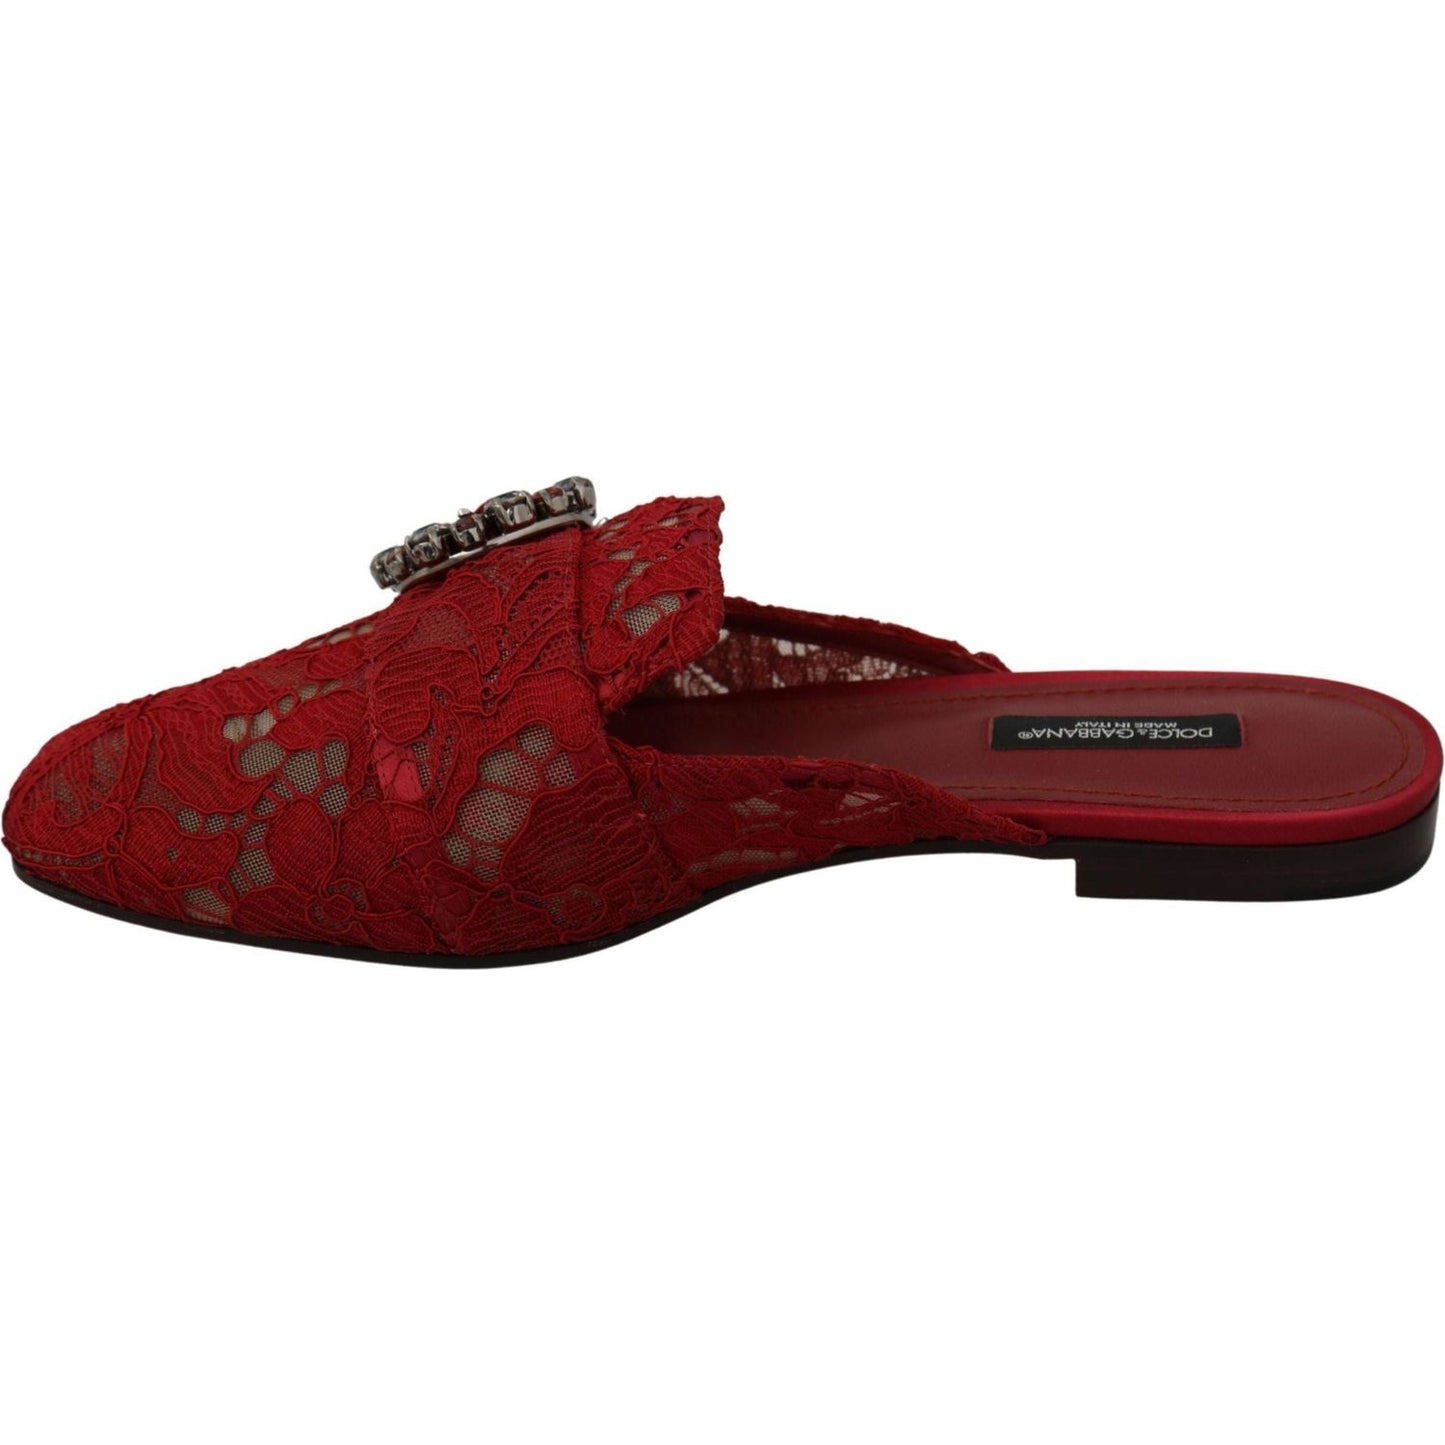 Dolce & Gabbana Radiant Red Slide Flats with Crystal Embellishments red-lace-crystal-slide-on-flats-shoes